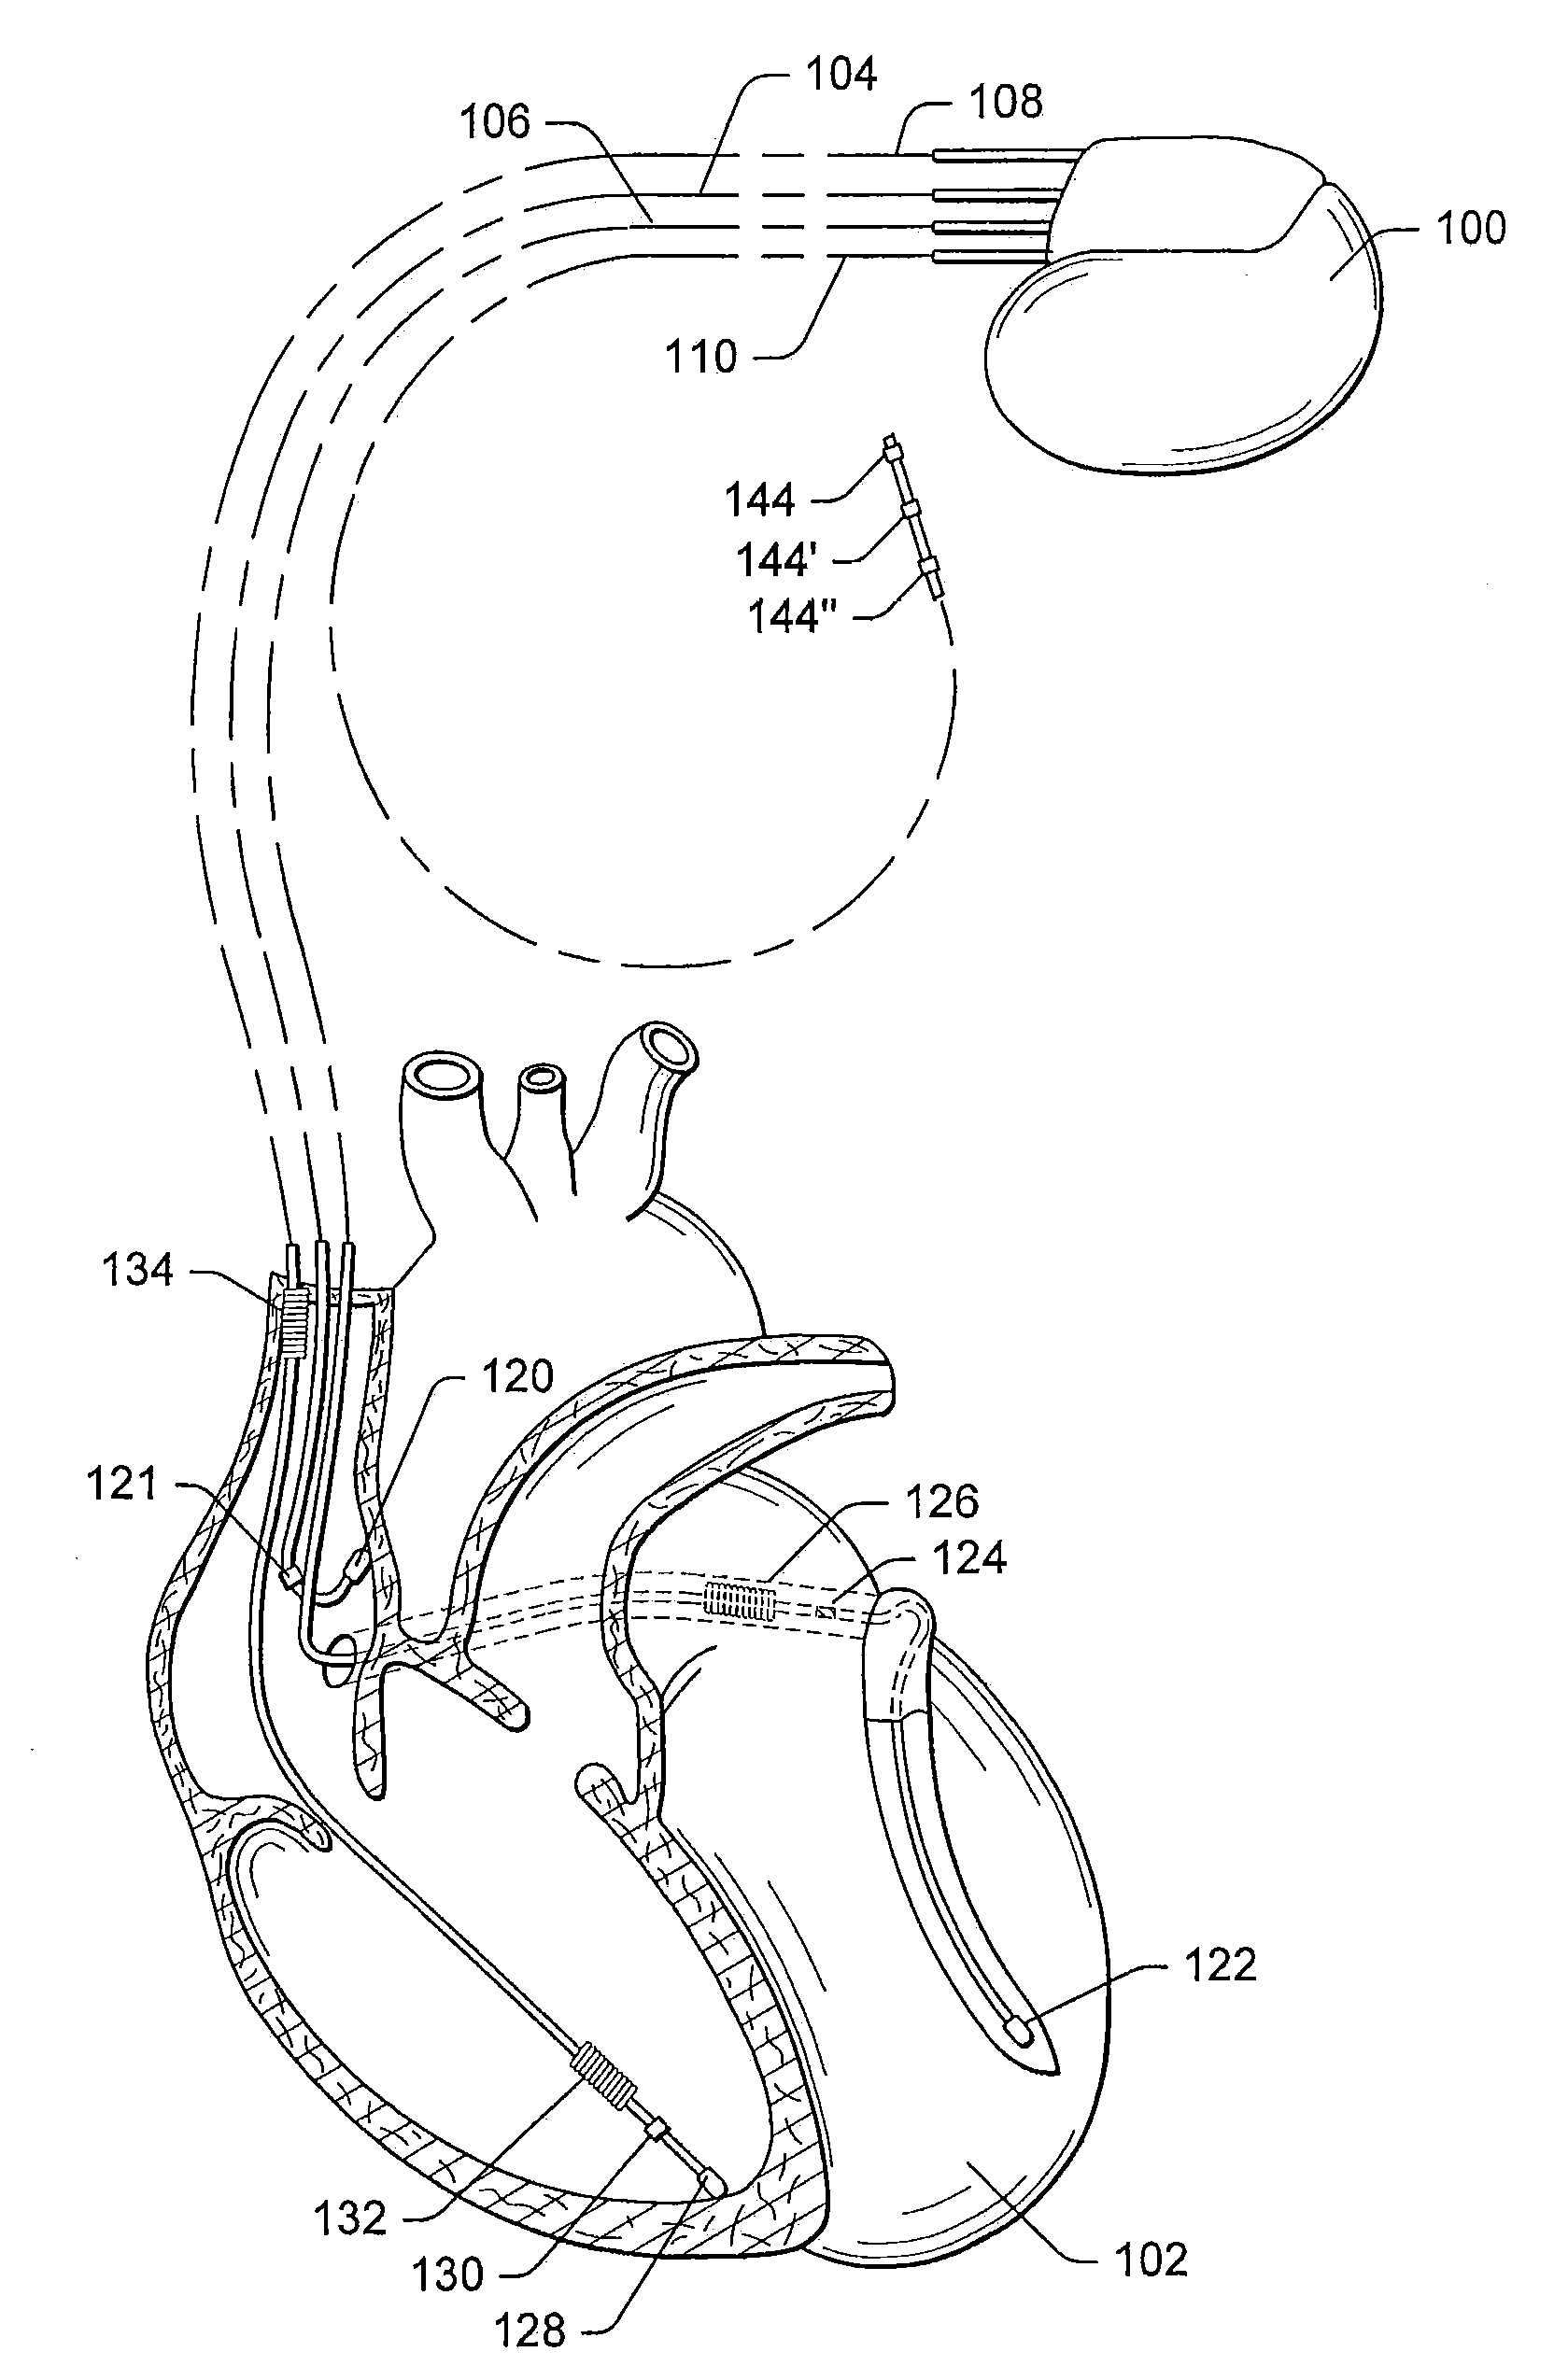 Systems and methods for determining inter-atrial conduction delays using multi-pole left ventricular pacing/sensing leads